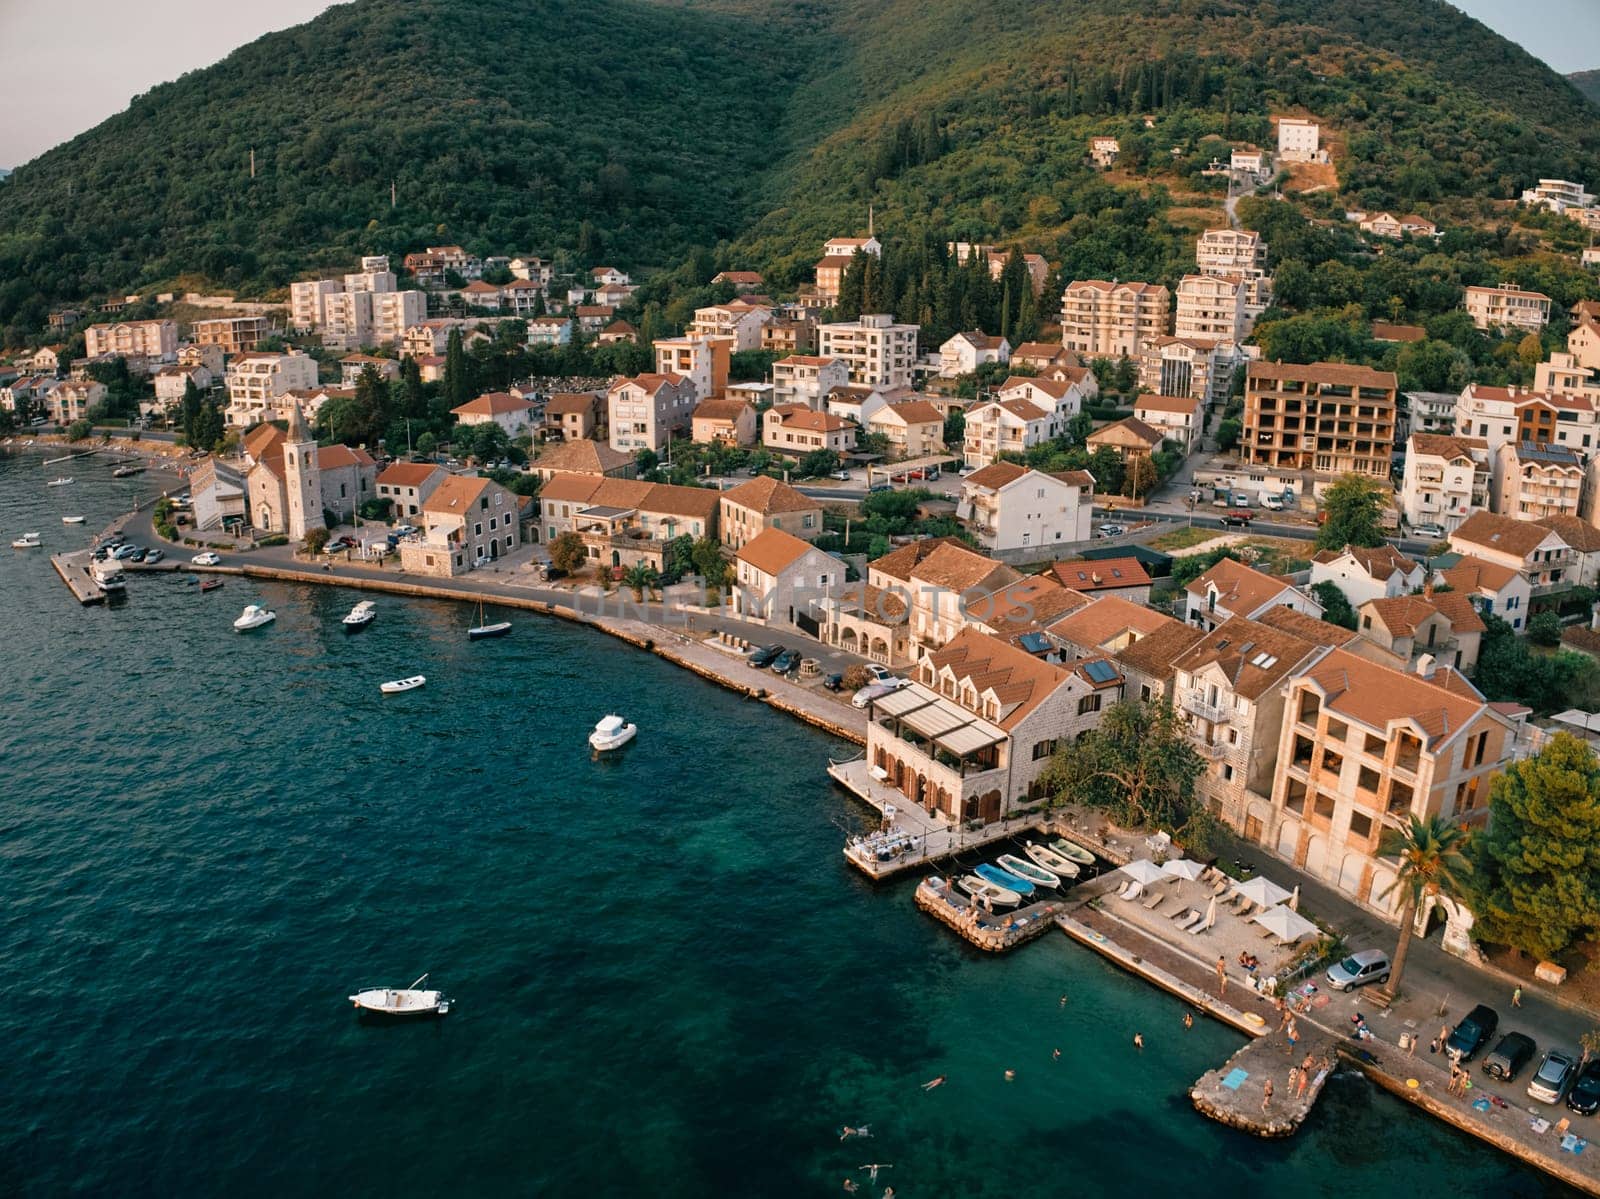 Promenade with old houses and moored boats. Tivat, Montenegro. Drone. High quality photo